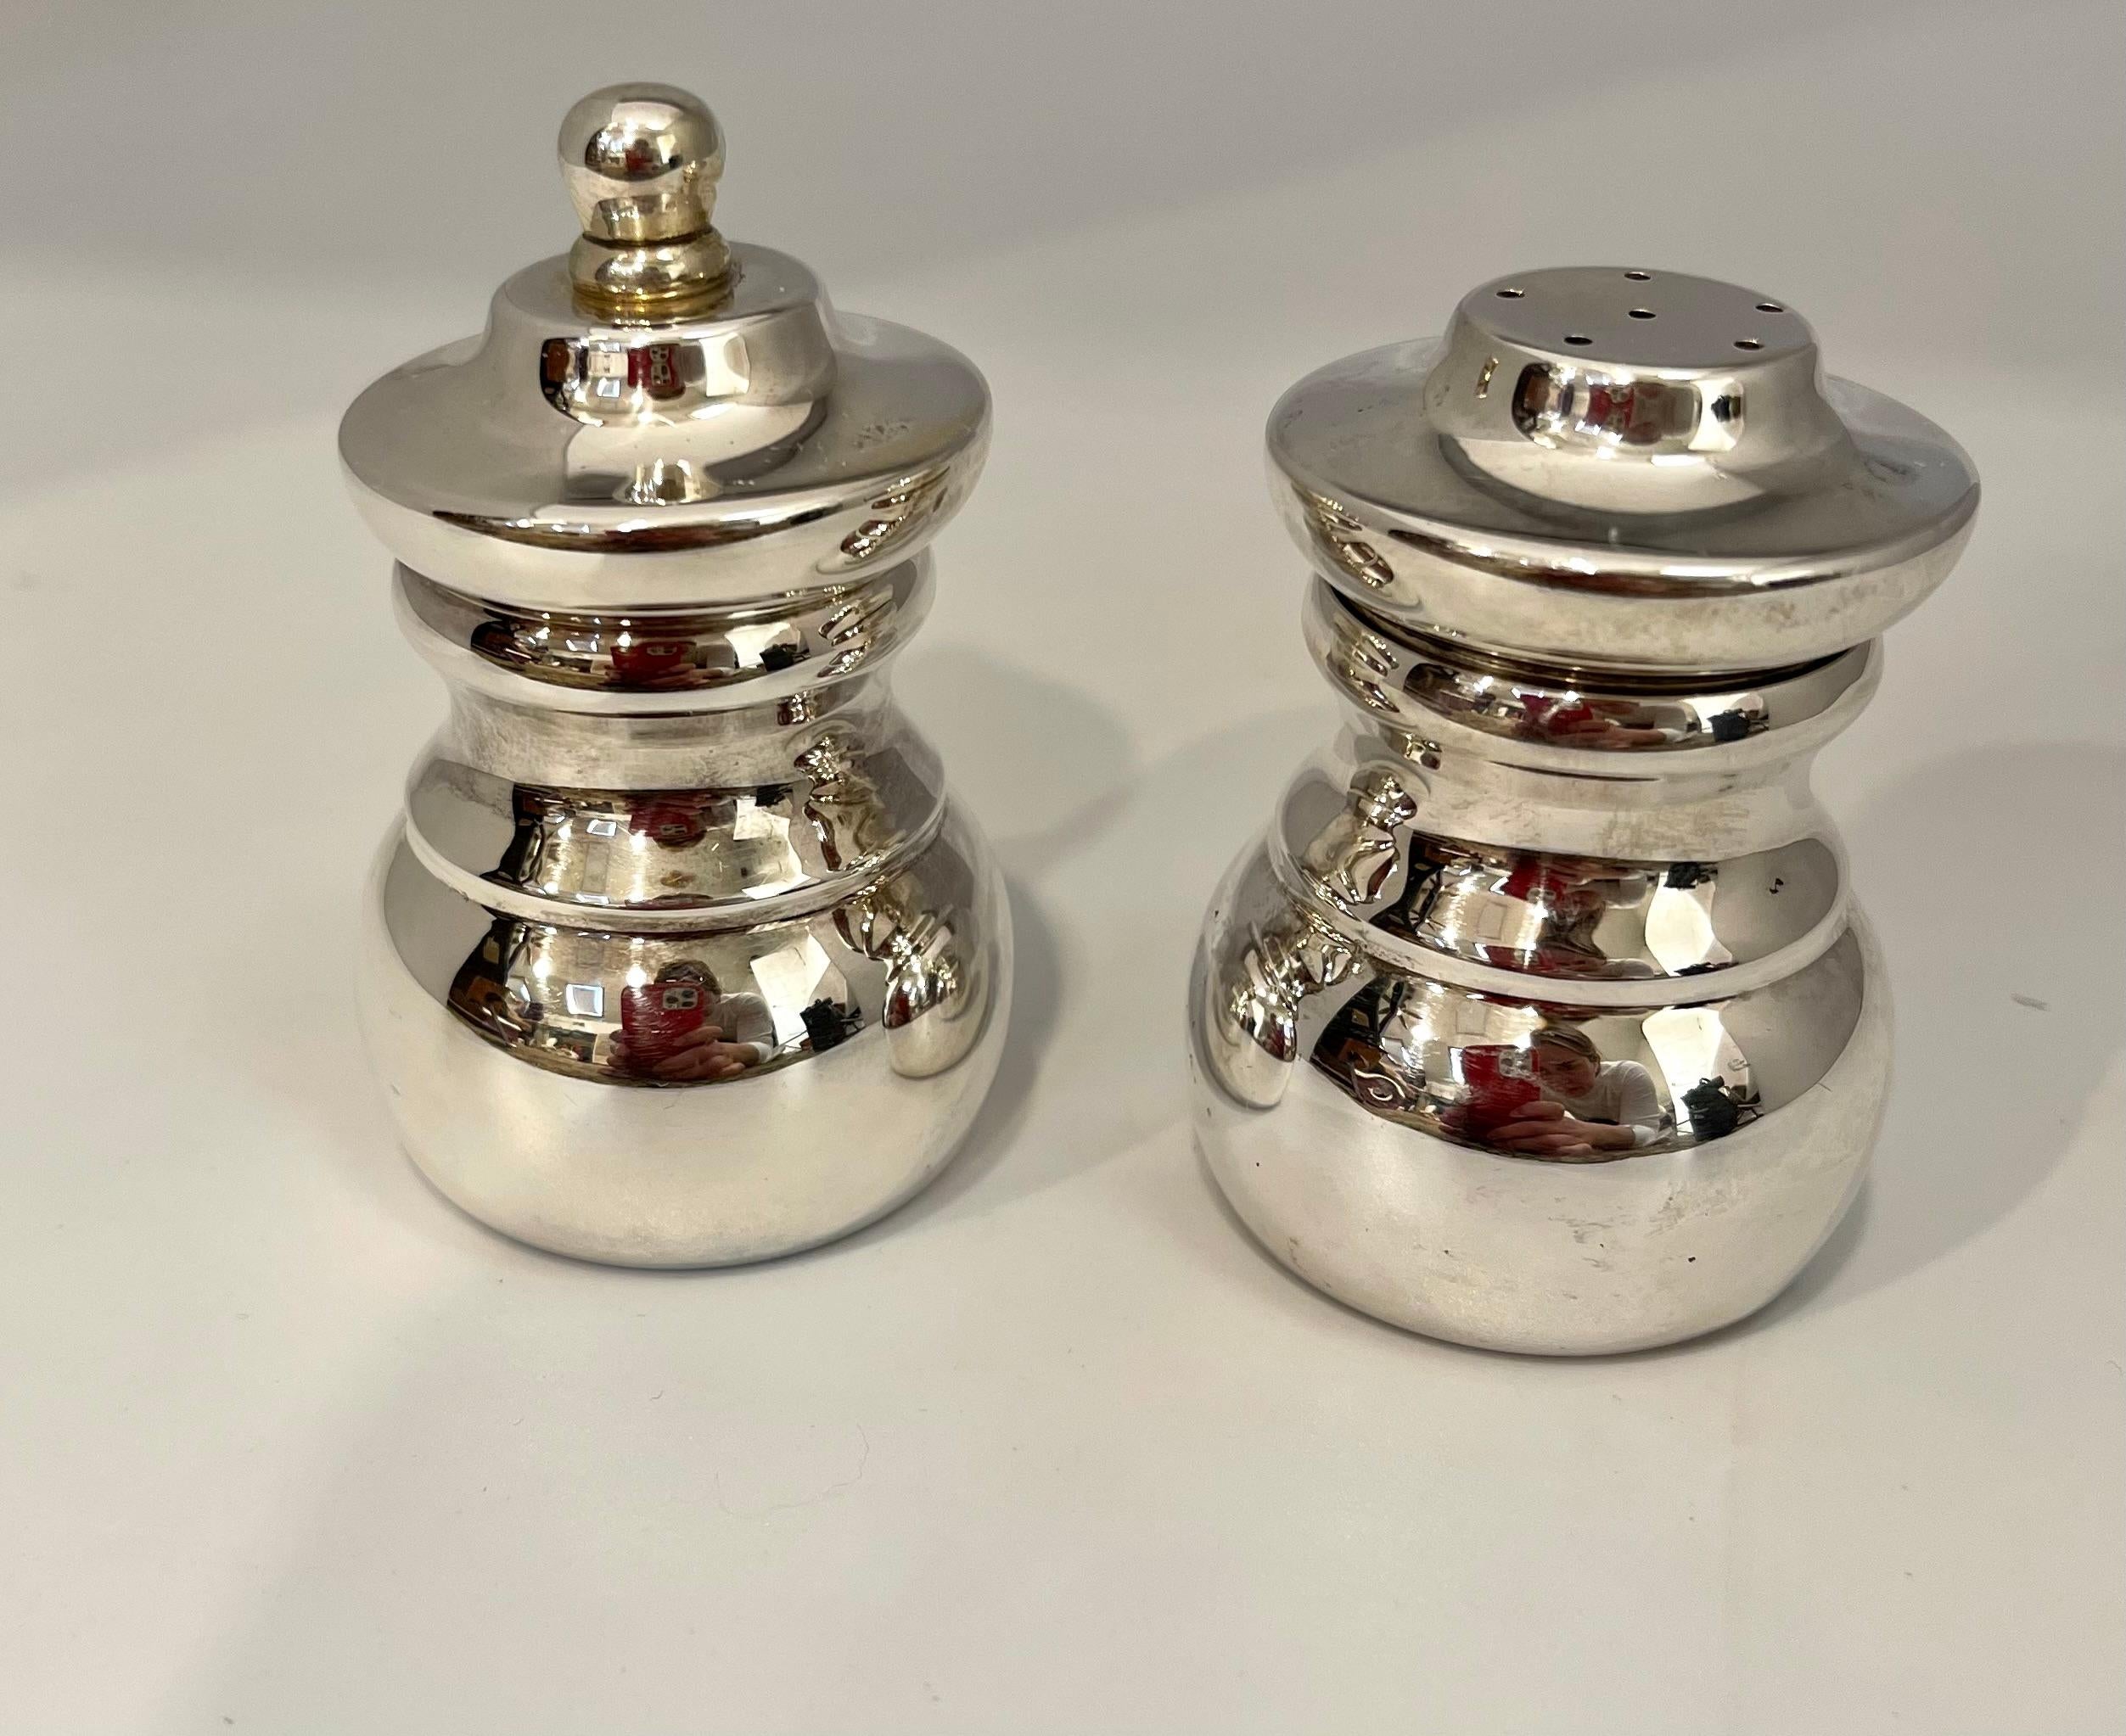 Two-Piece Tiffany & Co. Sterling Silver Salt & Pepper Set 174 Gm
Very Exclusive 
A Tiffany & Co maker's sterling silver Salt & Pepper set
It is  Signed and Engraved T & CO and made in Italy
This set is in excellent condition. Stunning!
Total weight